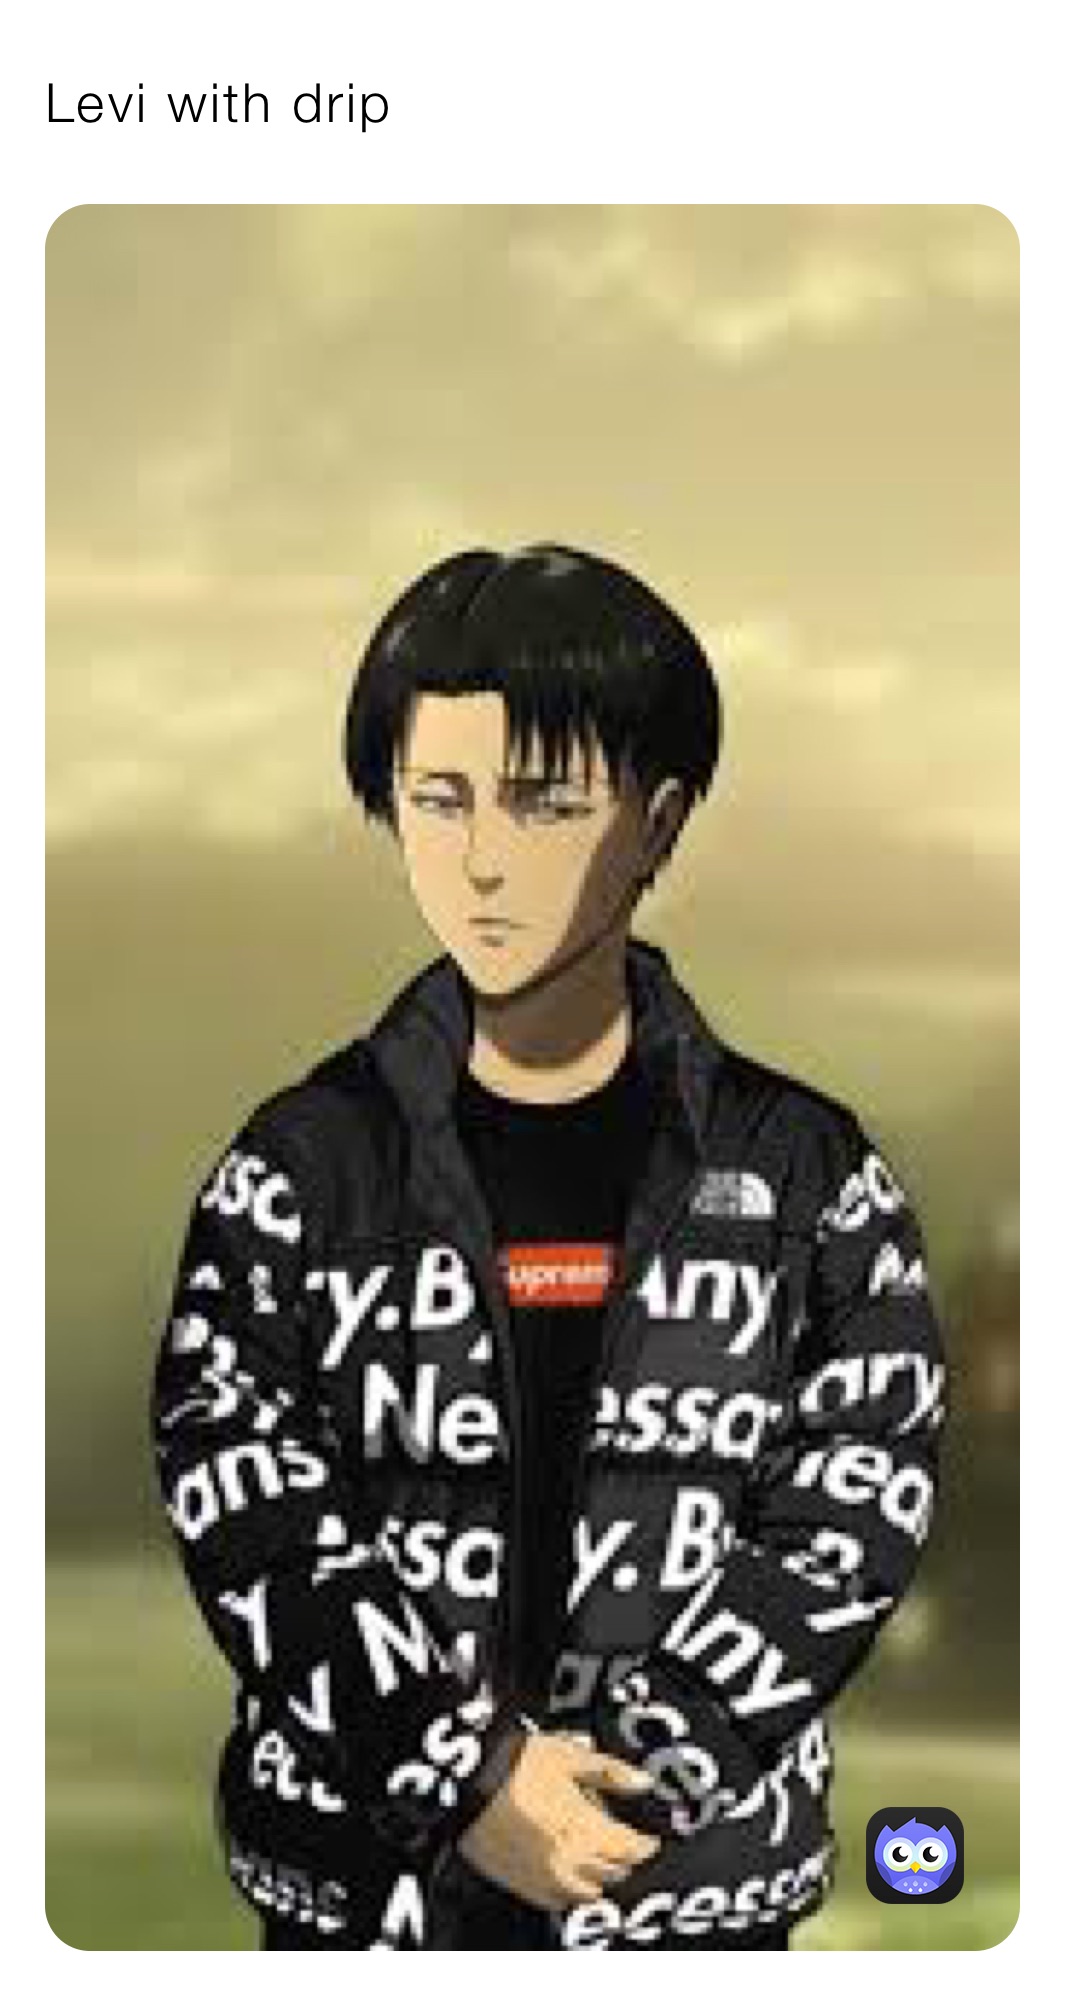 Levi with drip